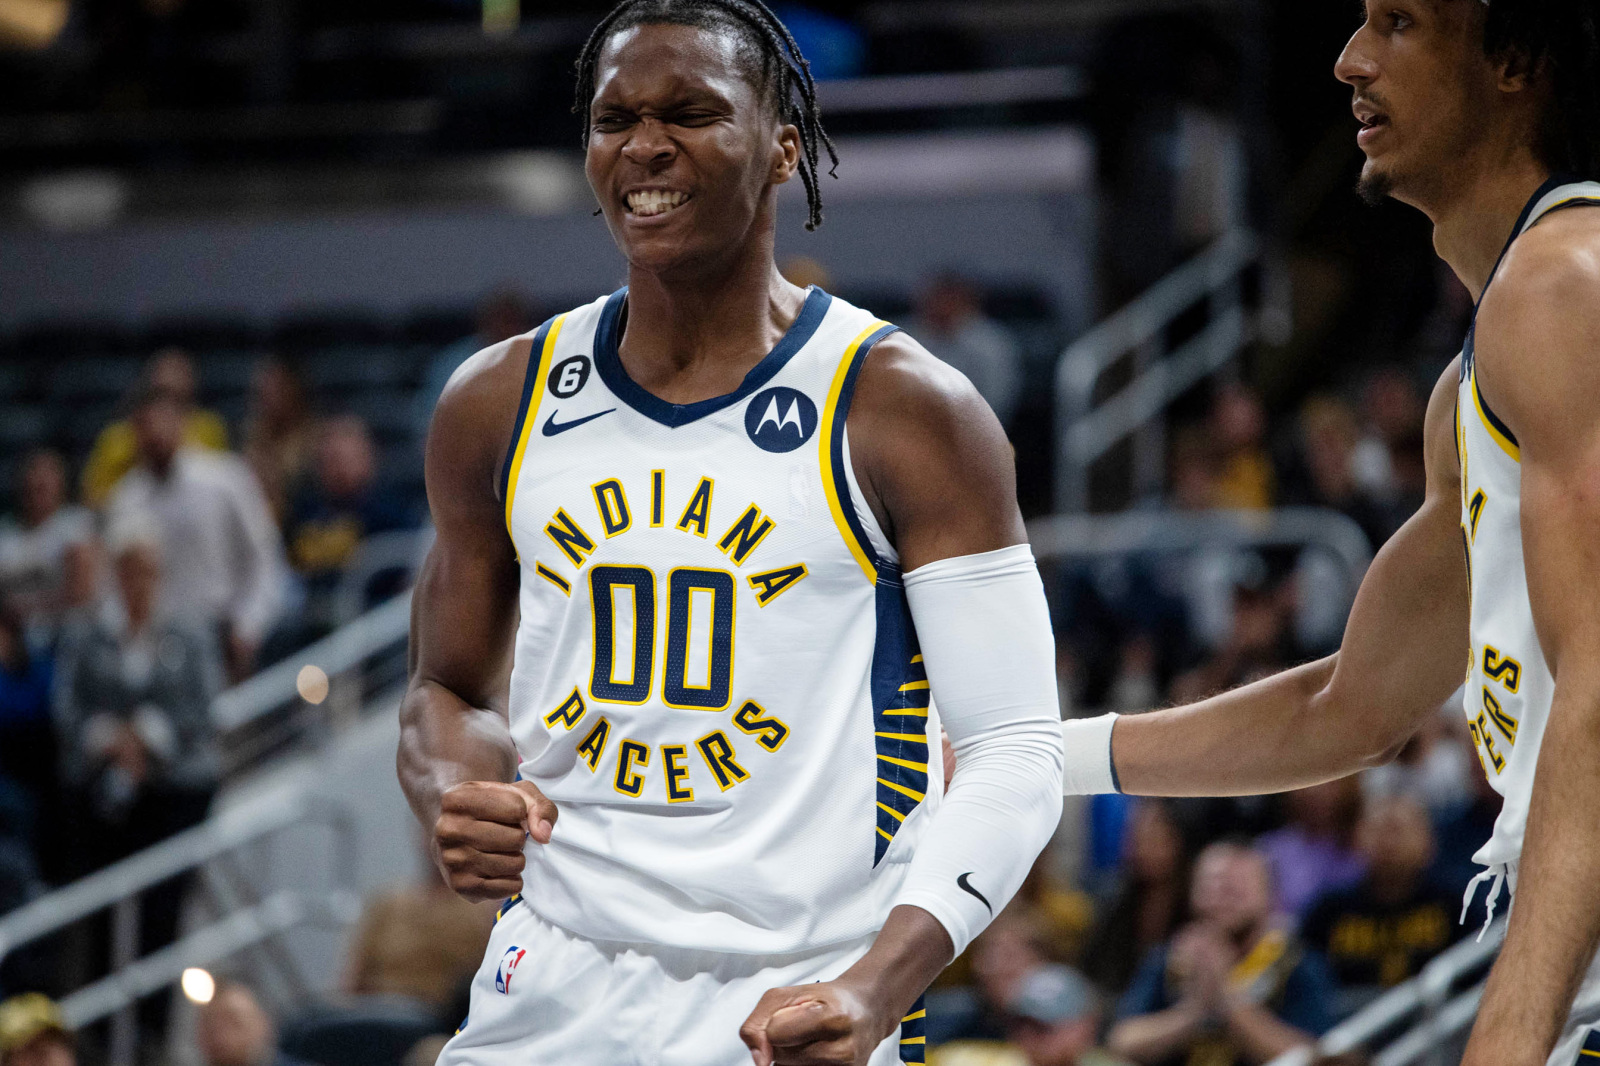 Pacers rookie Bennedict Mathurin is ready to shine in the Rising